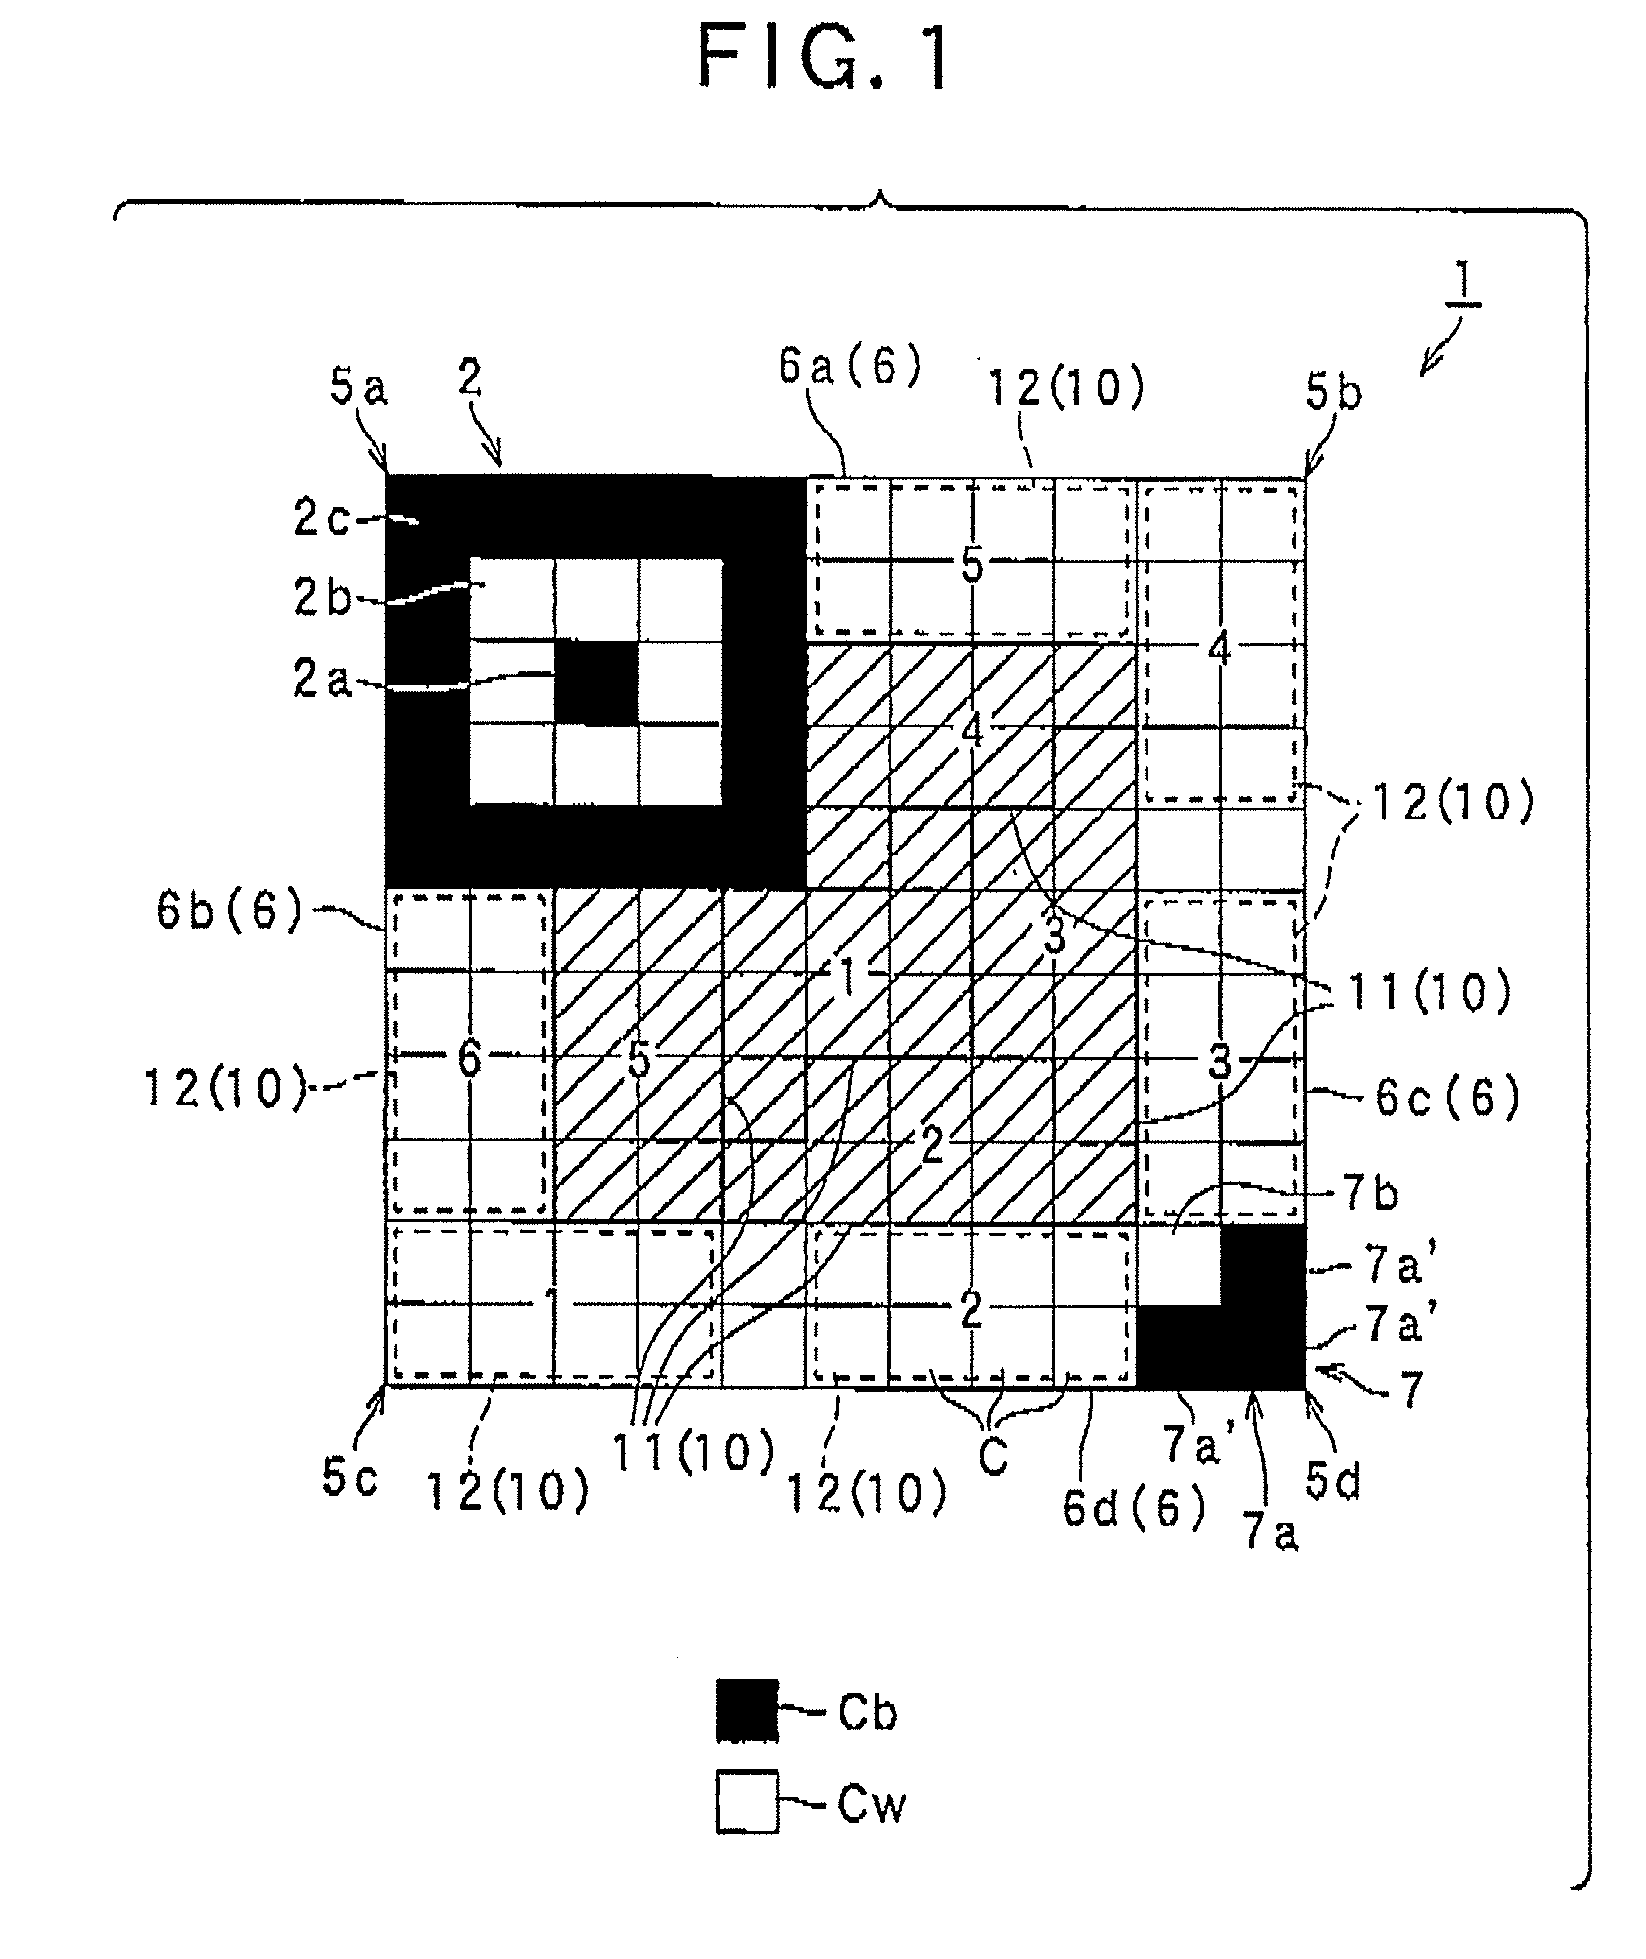 Two-dimensional code having rectangular region provided with specific patterns for specification of cell postions and distinction from background